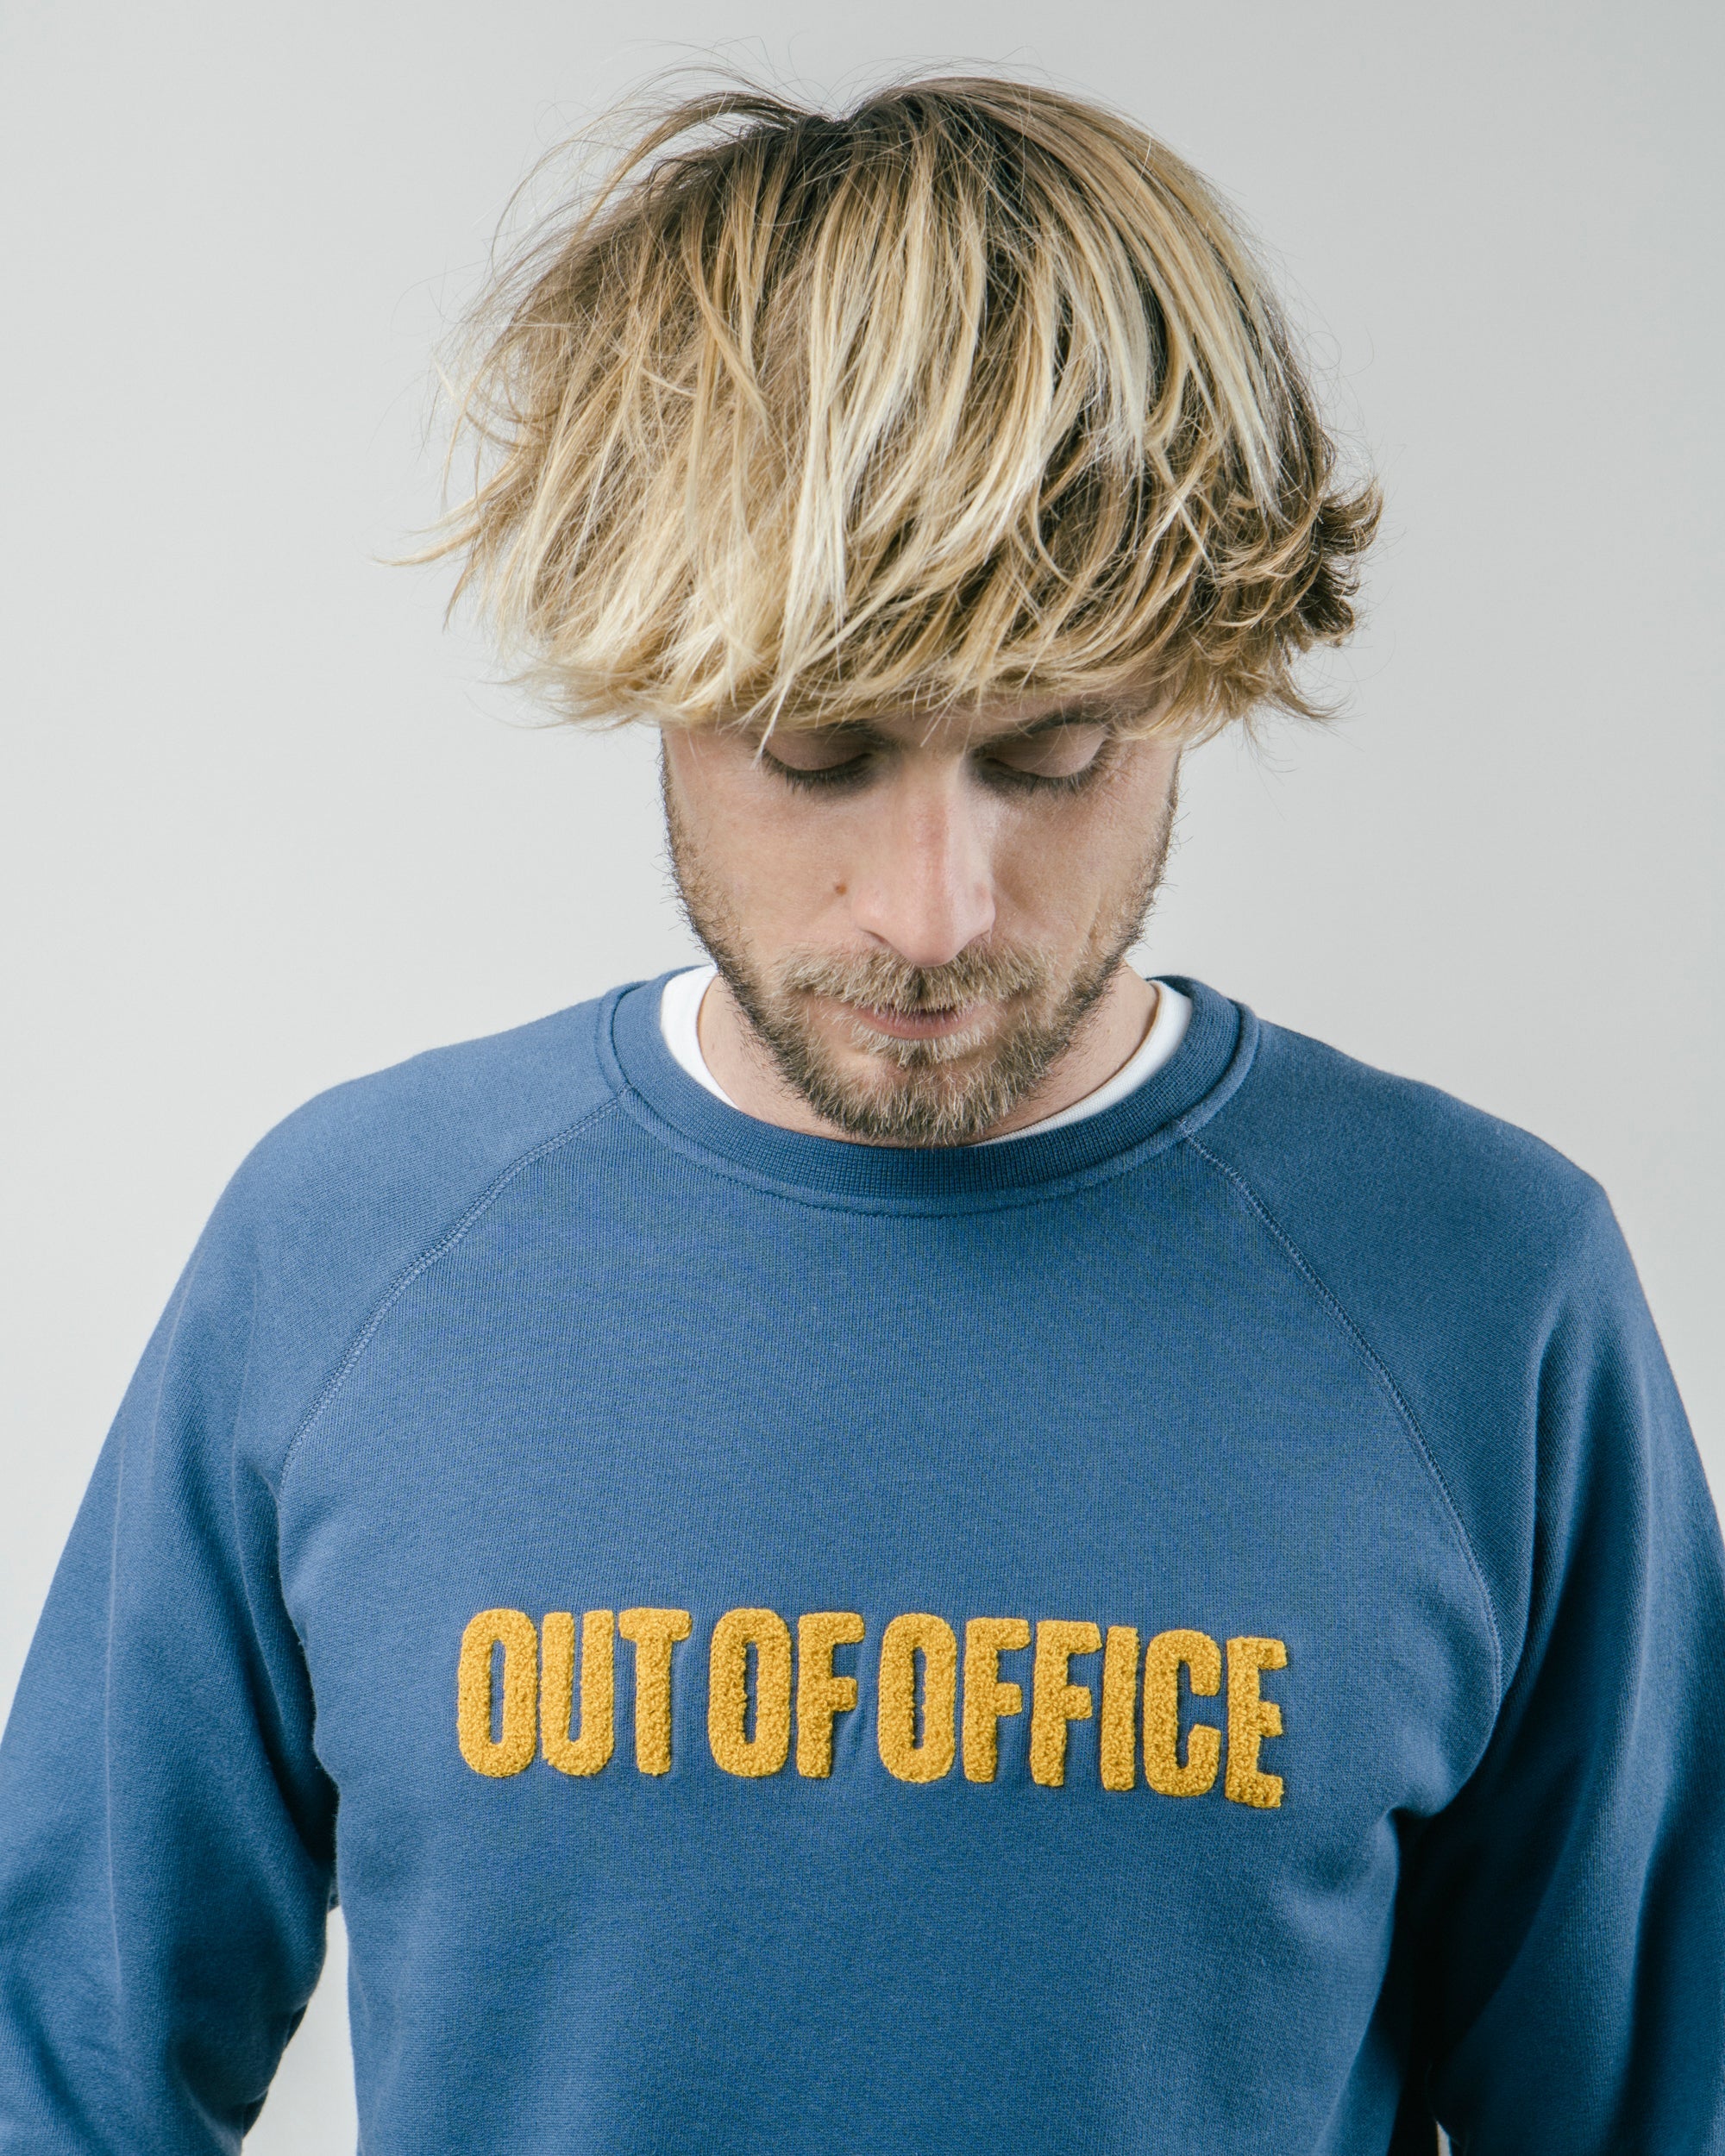 Out of Office Sweatshirt